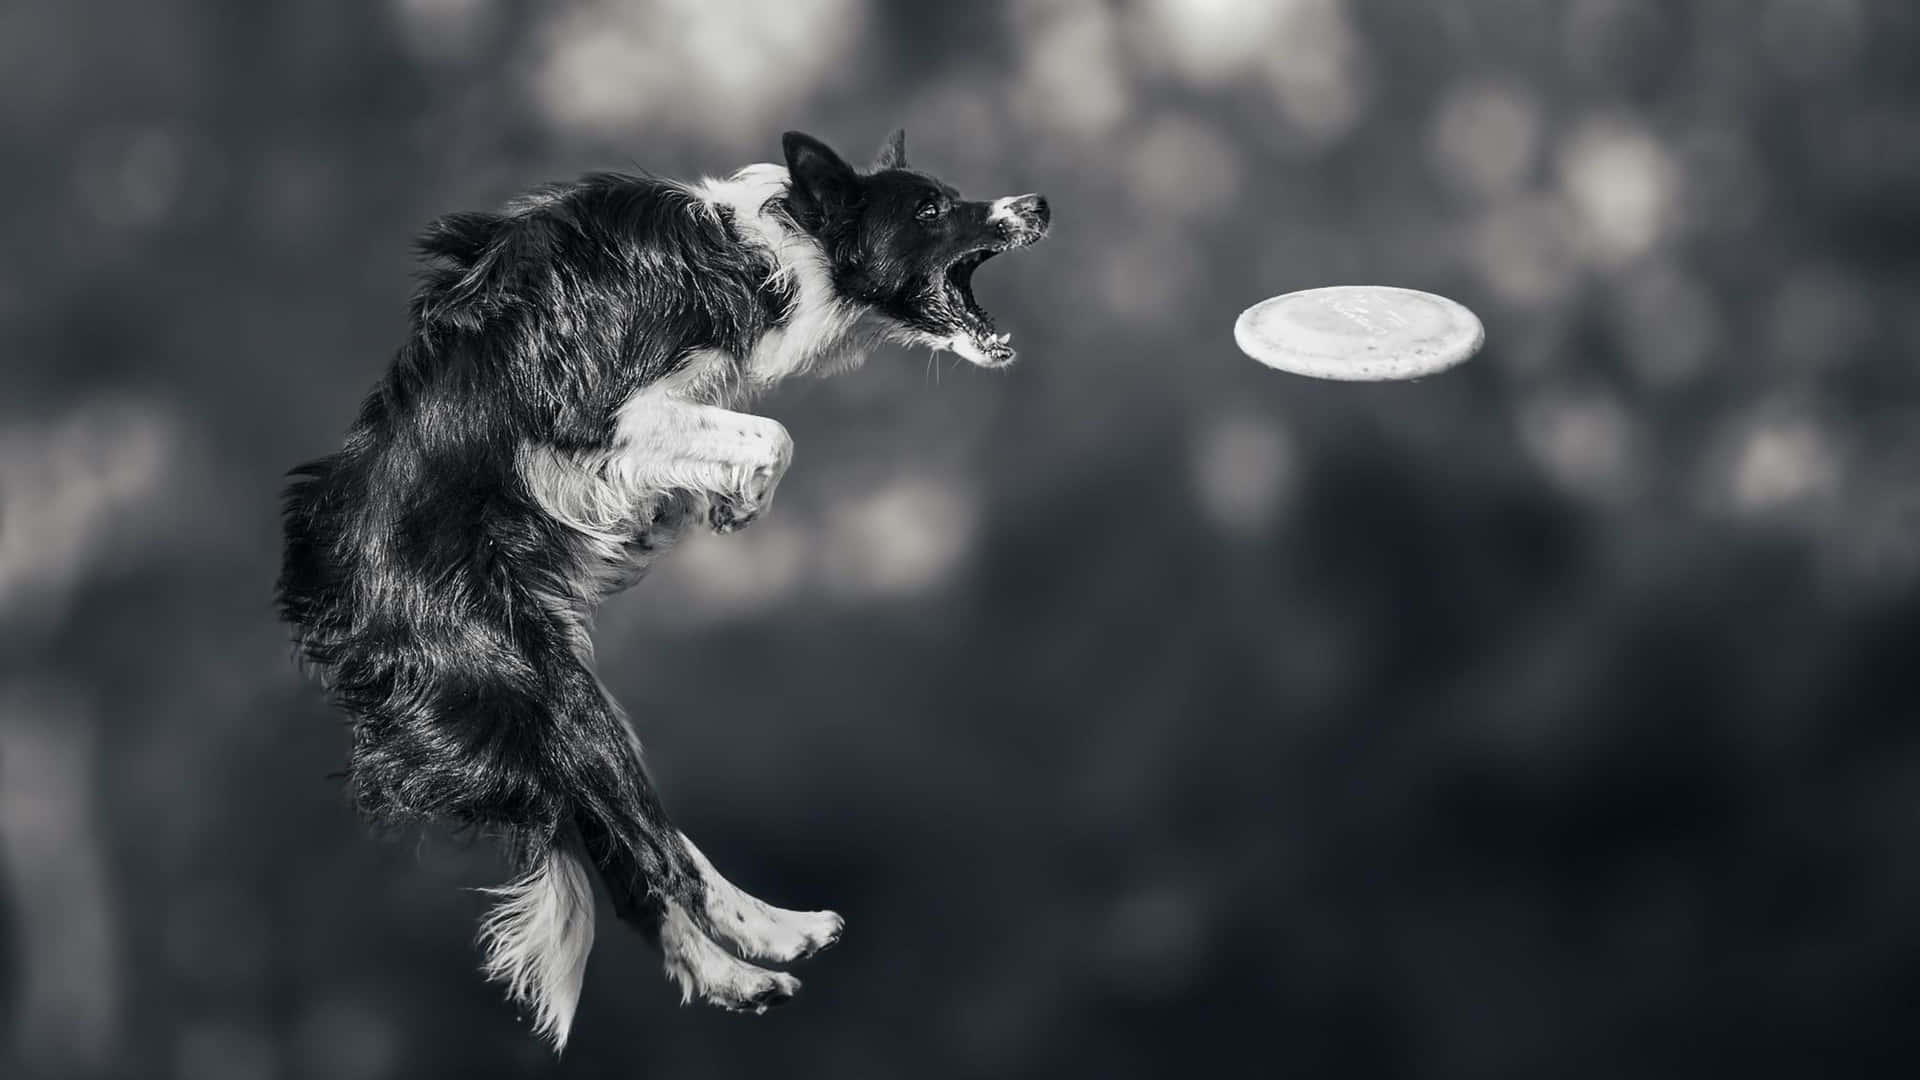 A Dog Jumping Up To Catch A Frisbee